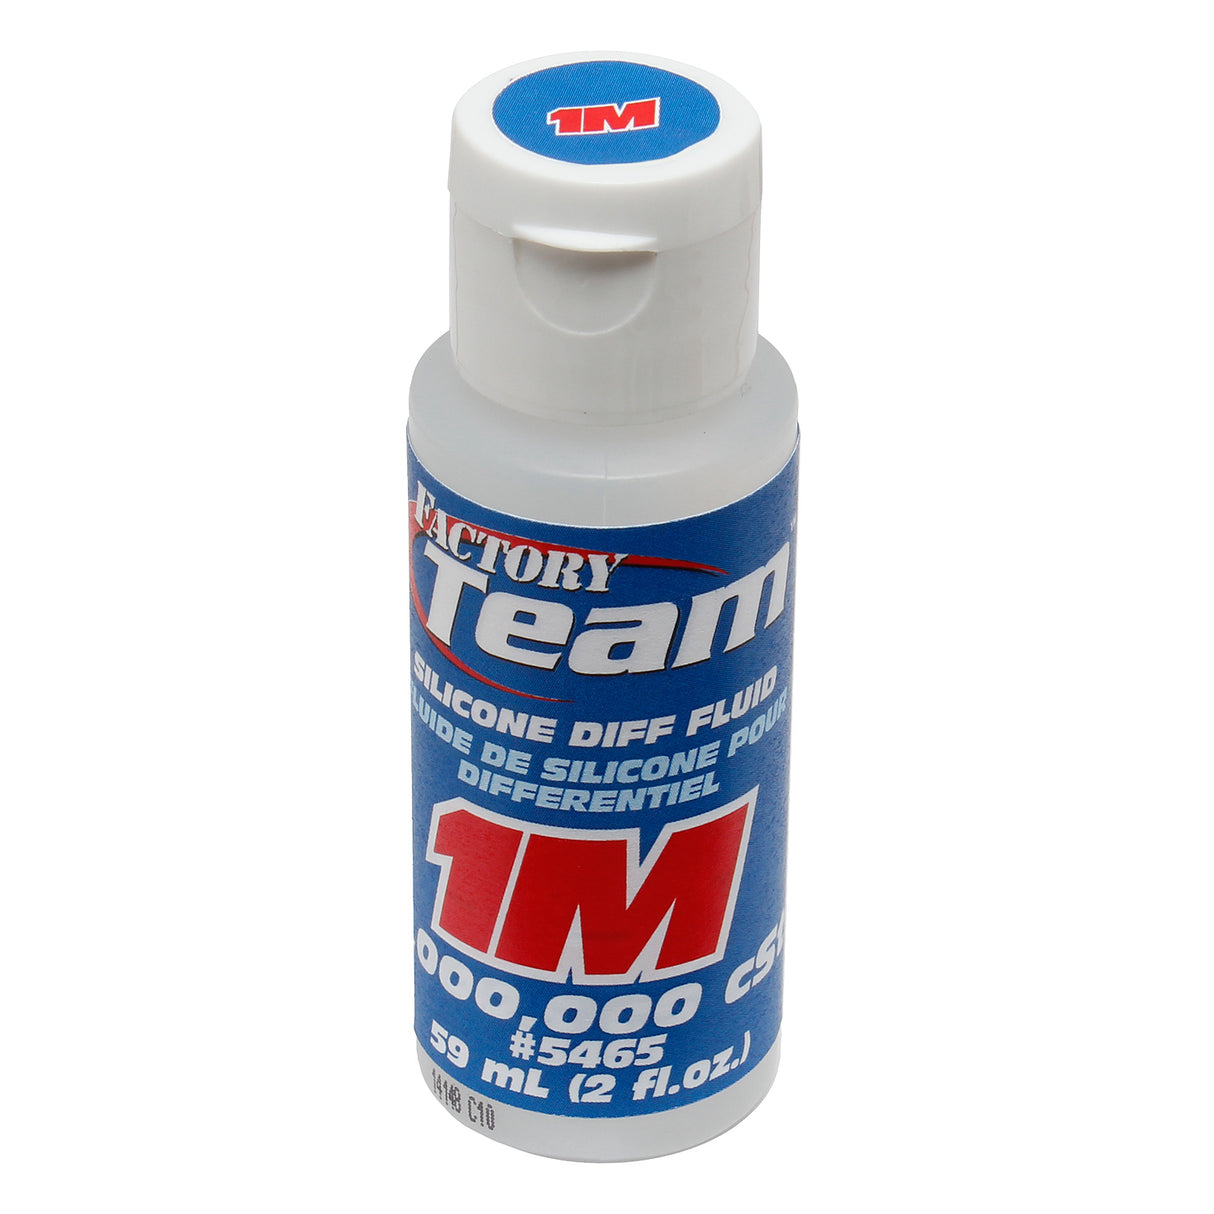 Team Associated Silicone Diff Oil 1000000Cst 59ml